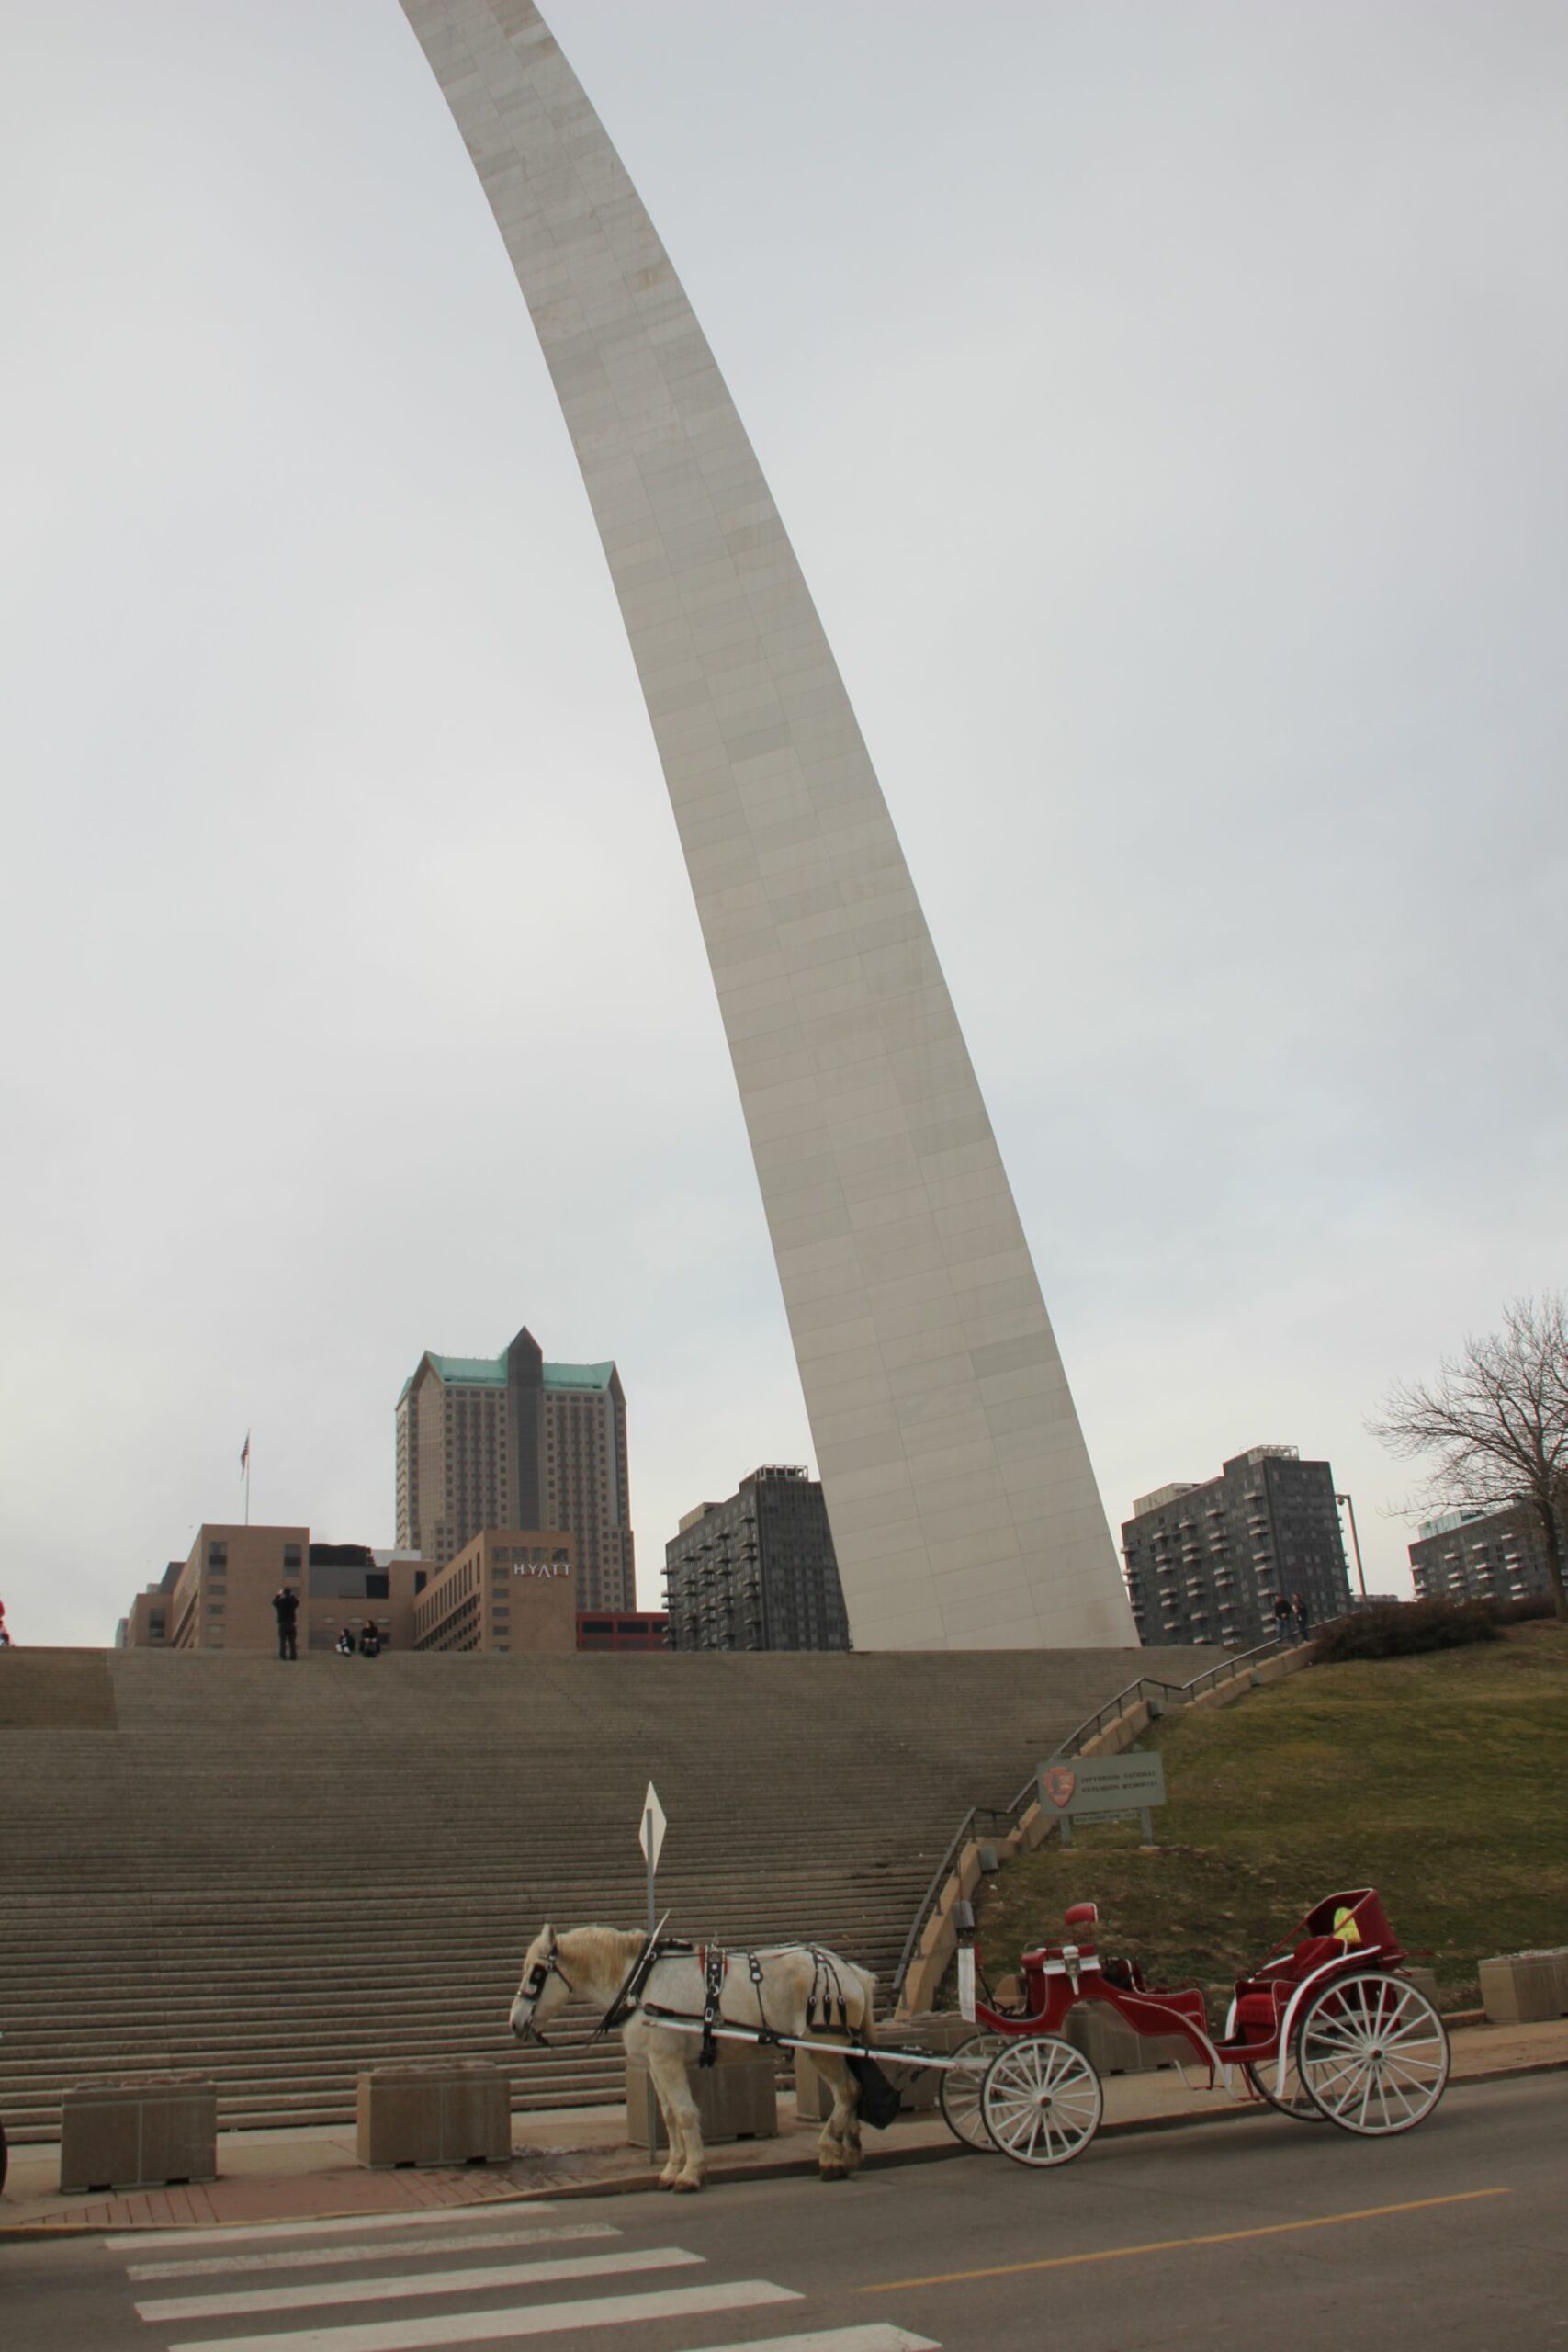 St. Louis Gateway Arch with horse and buggy